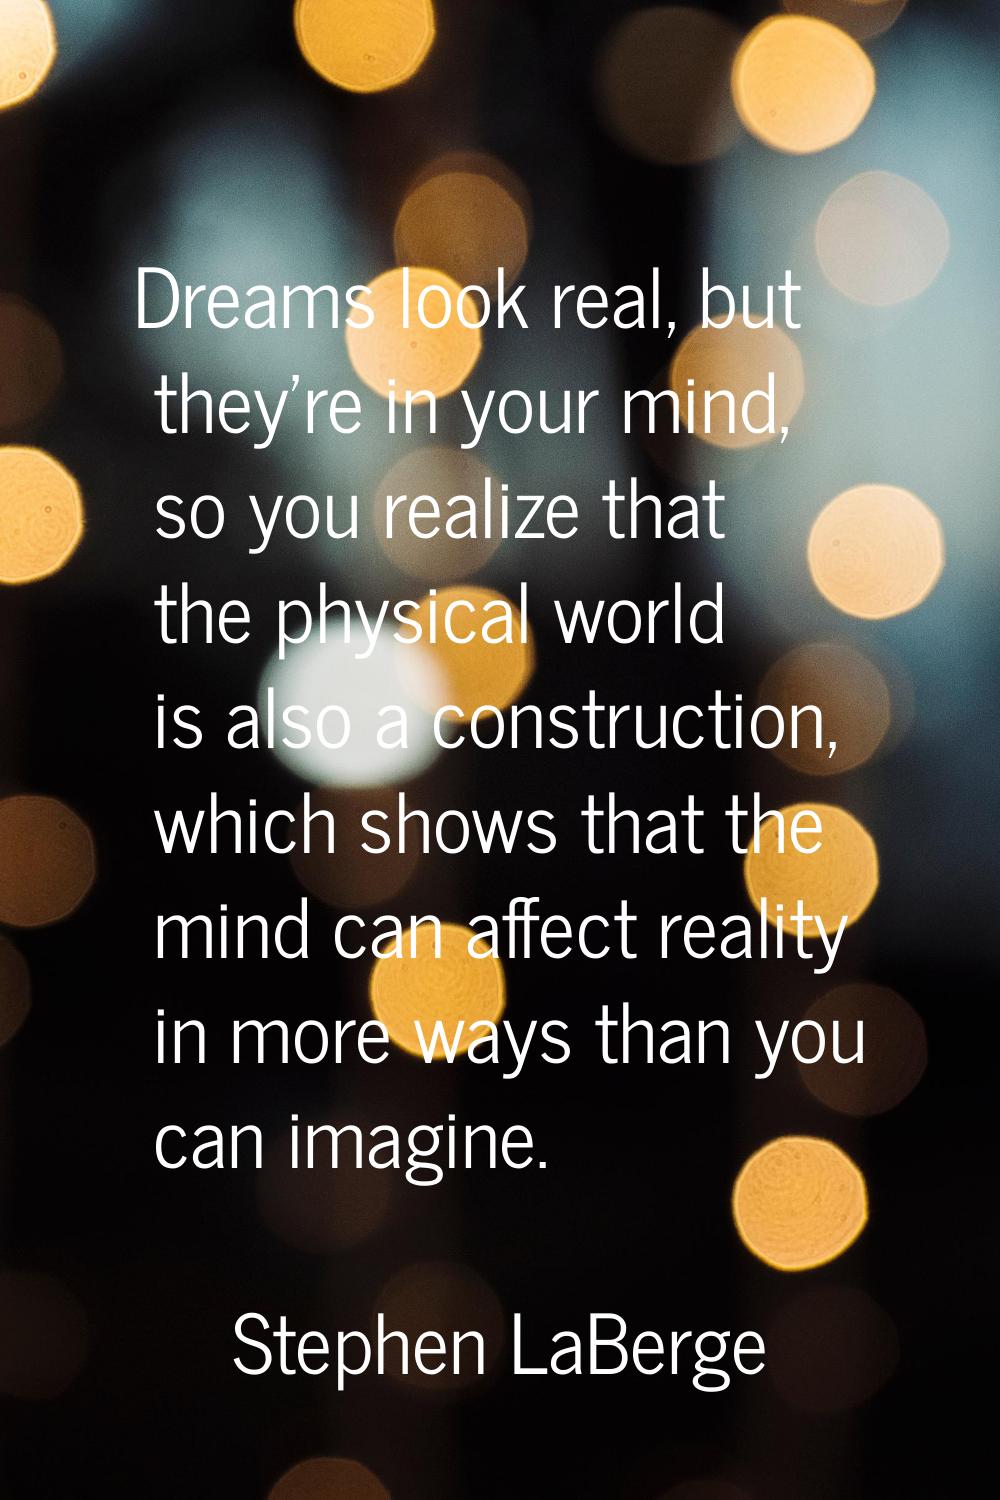 Dreams look real, but they're in your mind, so you realize that the physical world is also a constr